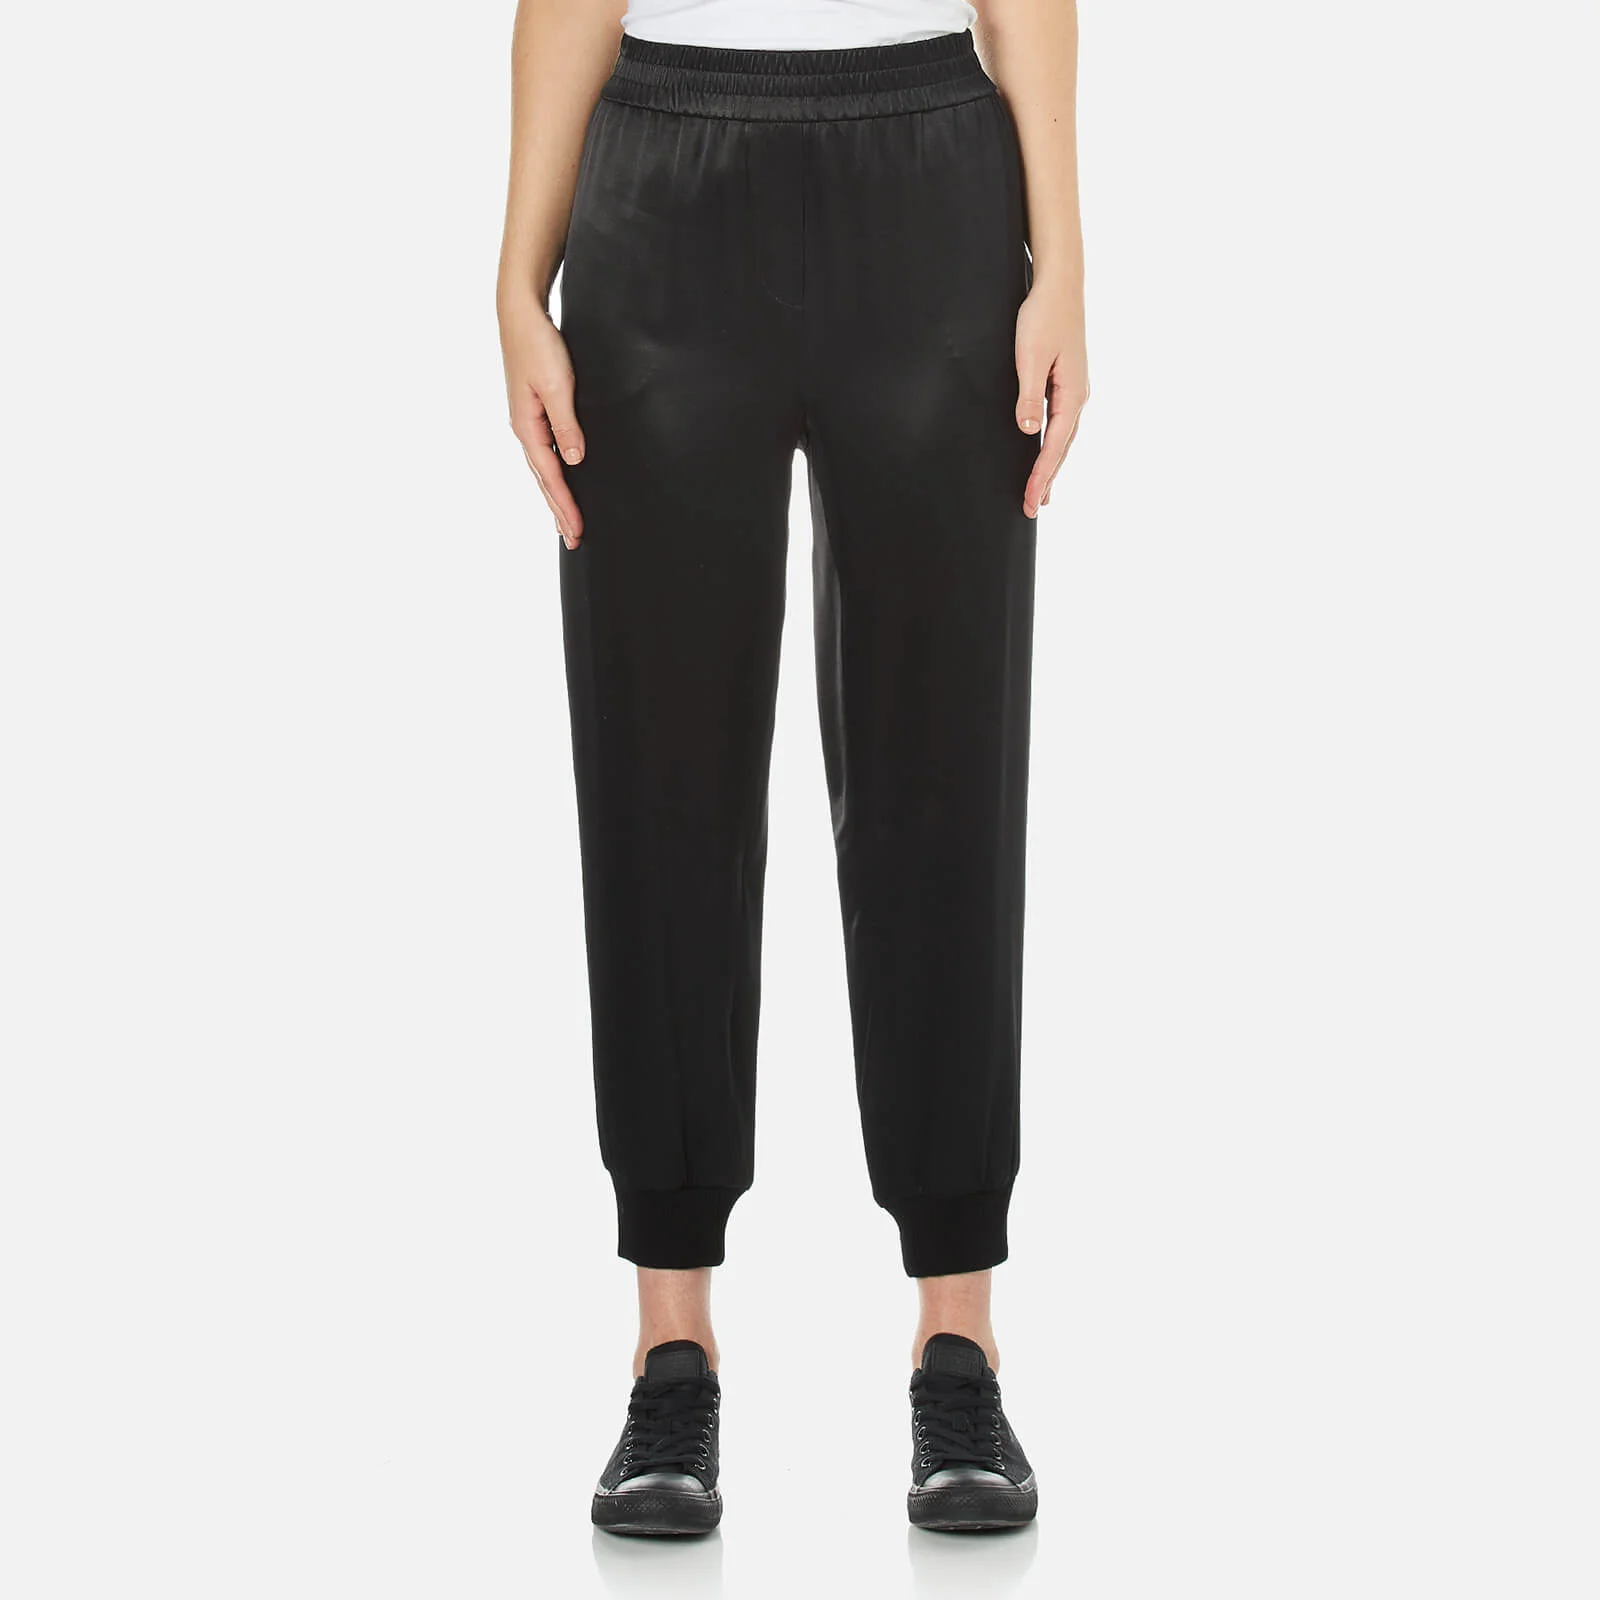 DKNY Women's Pull On Pants with Ribbed Ankle Cuff - Black Image 1